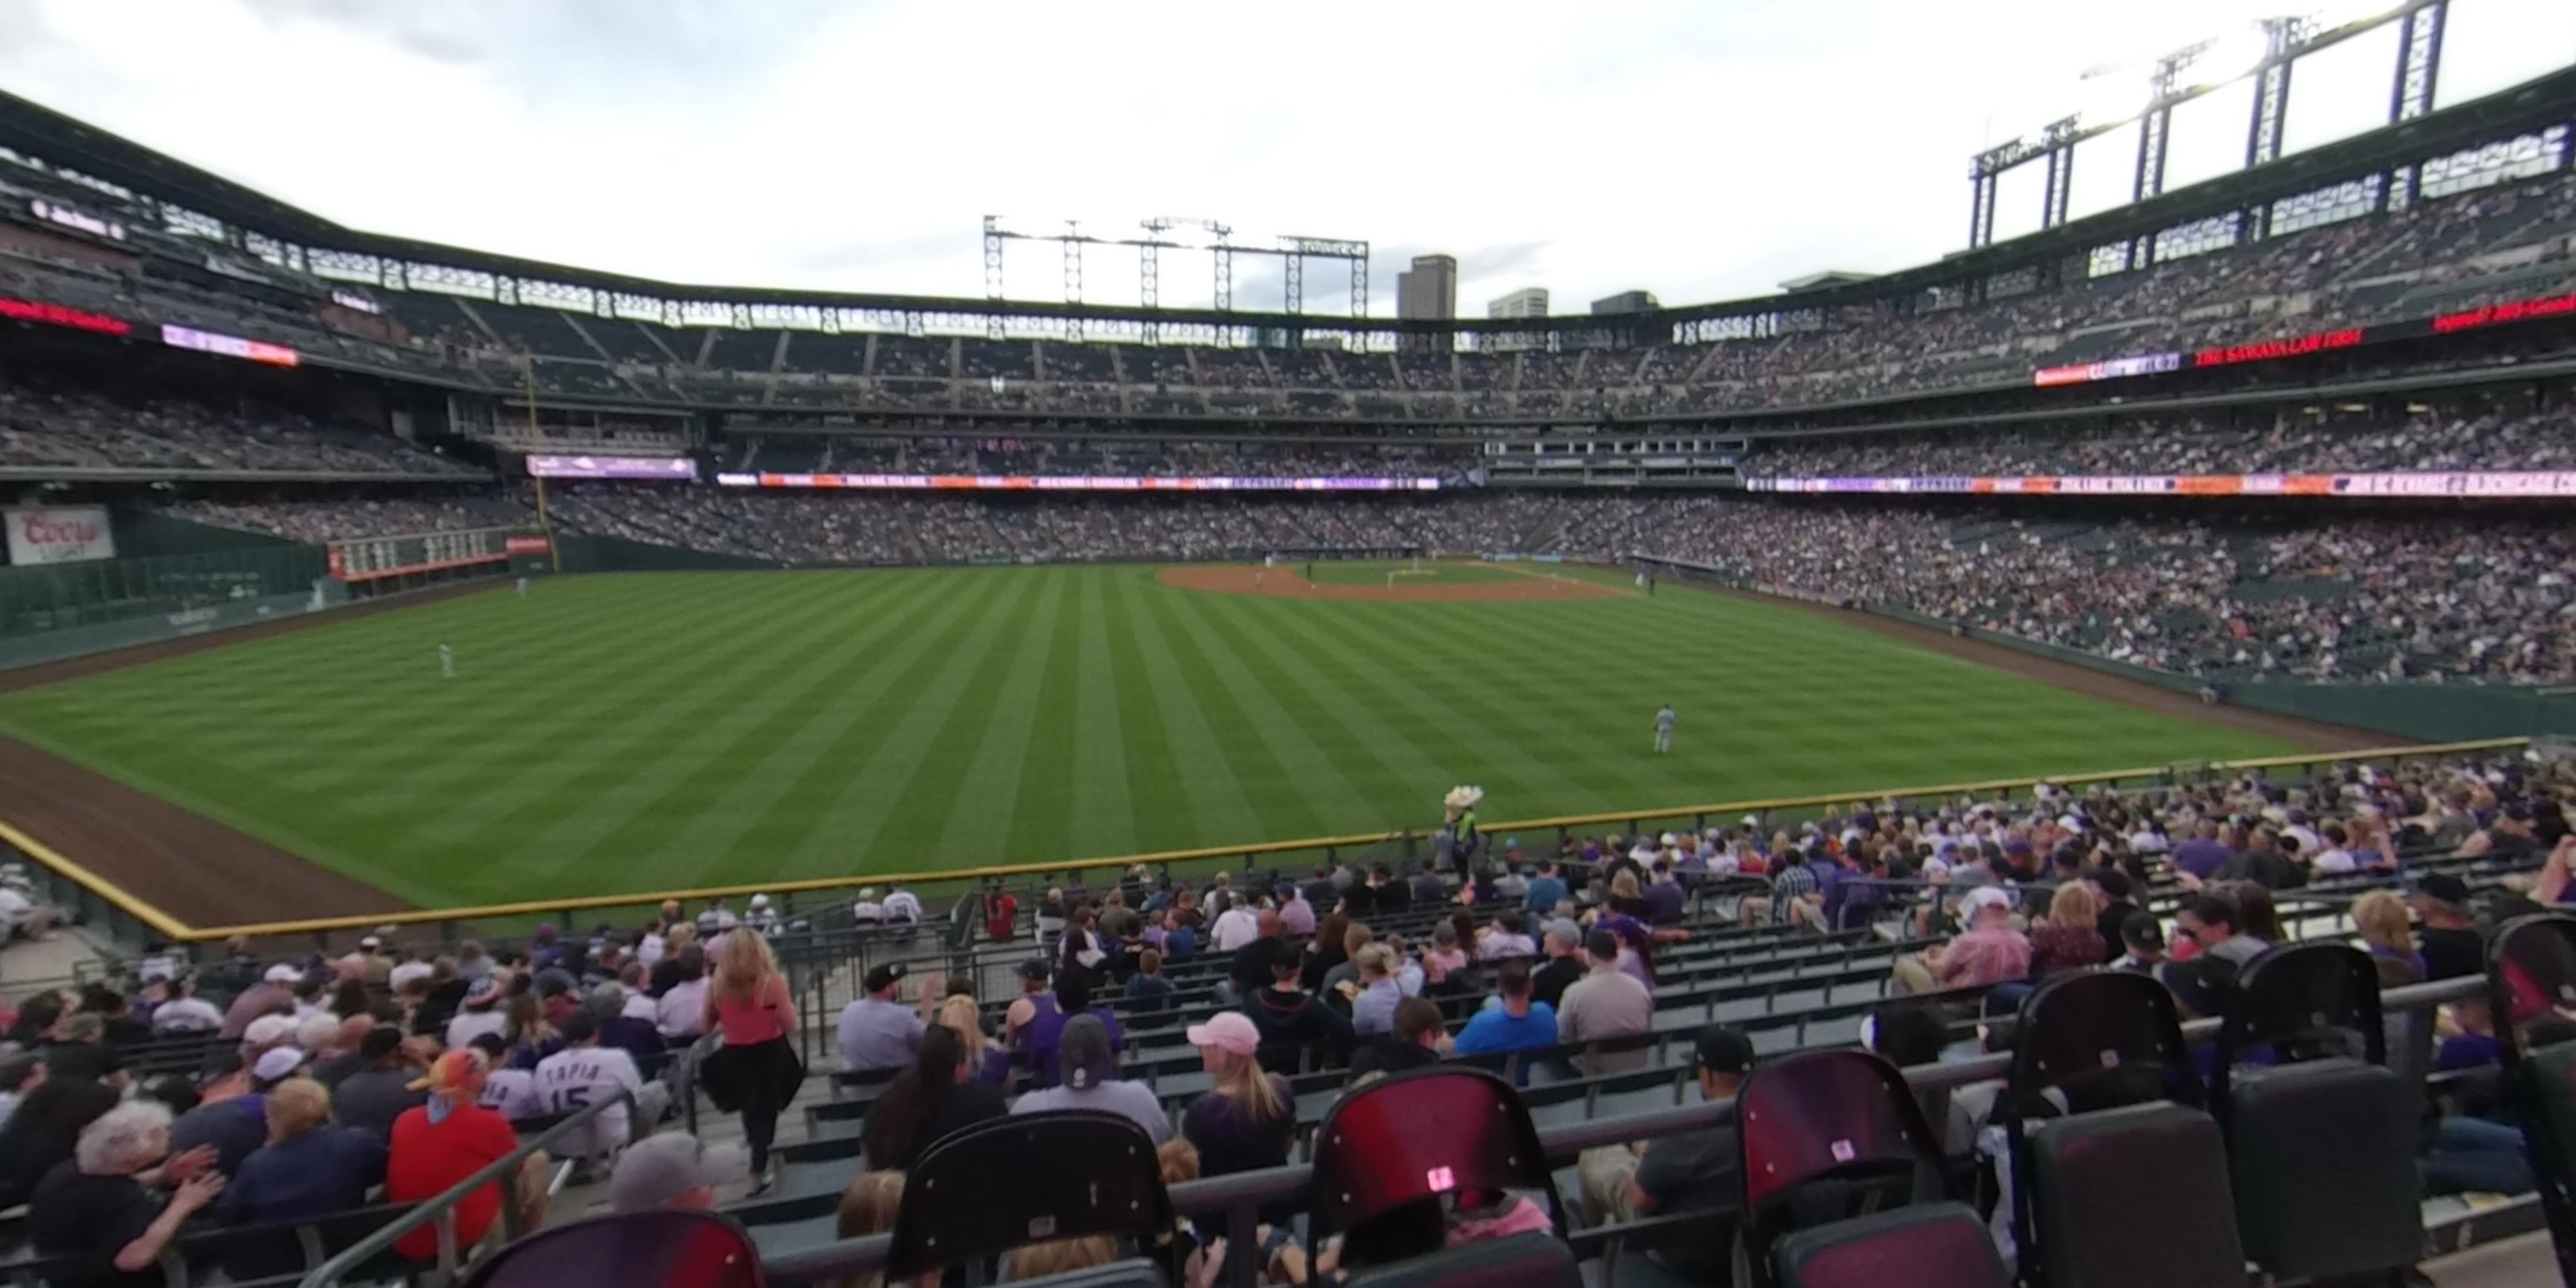 section 155 panoramic seat view  - coors field